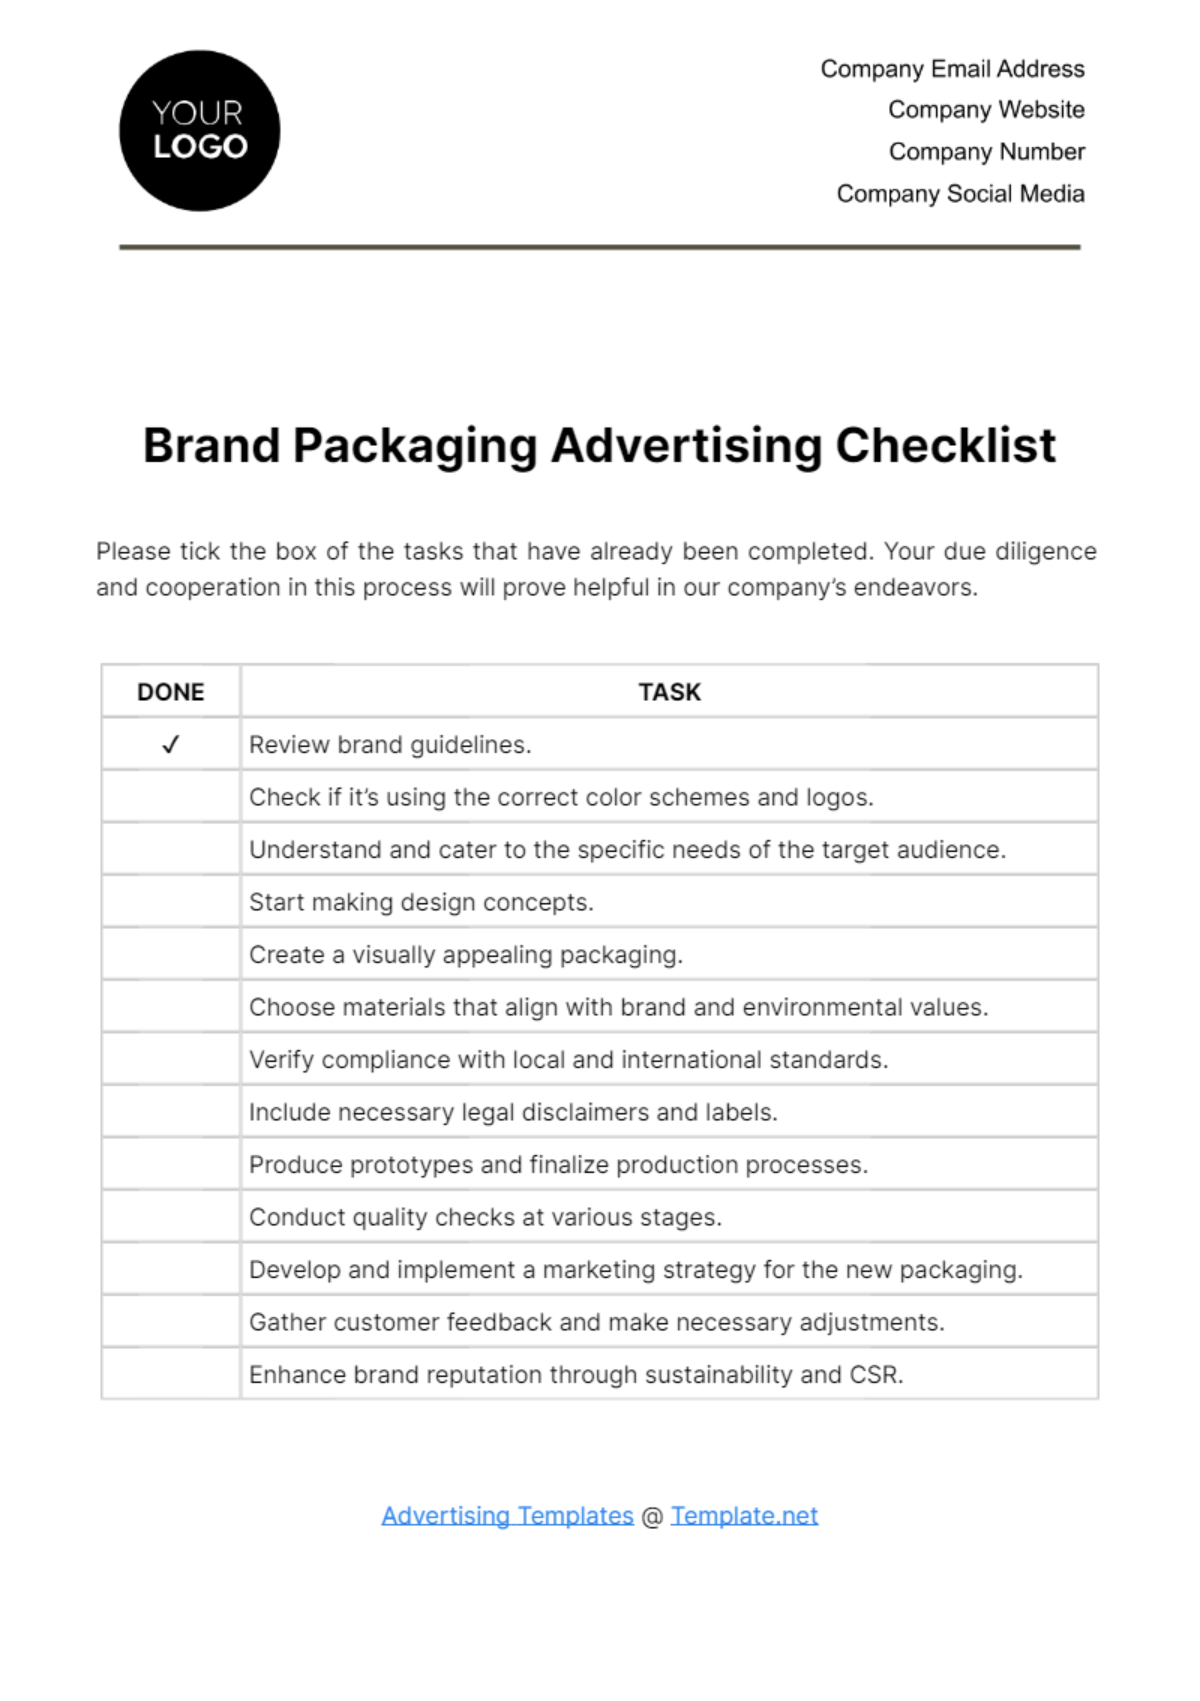 Free Brand Packaging Advertising Checklist Template